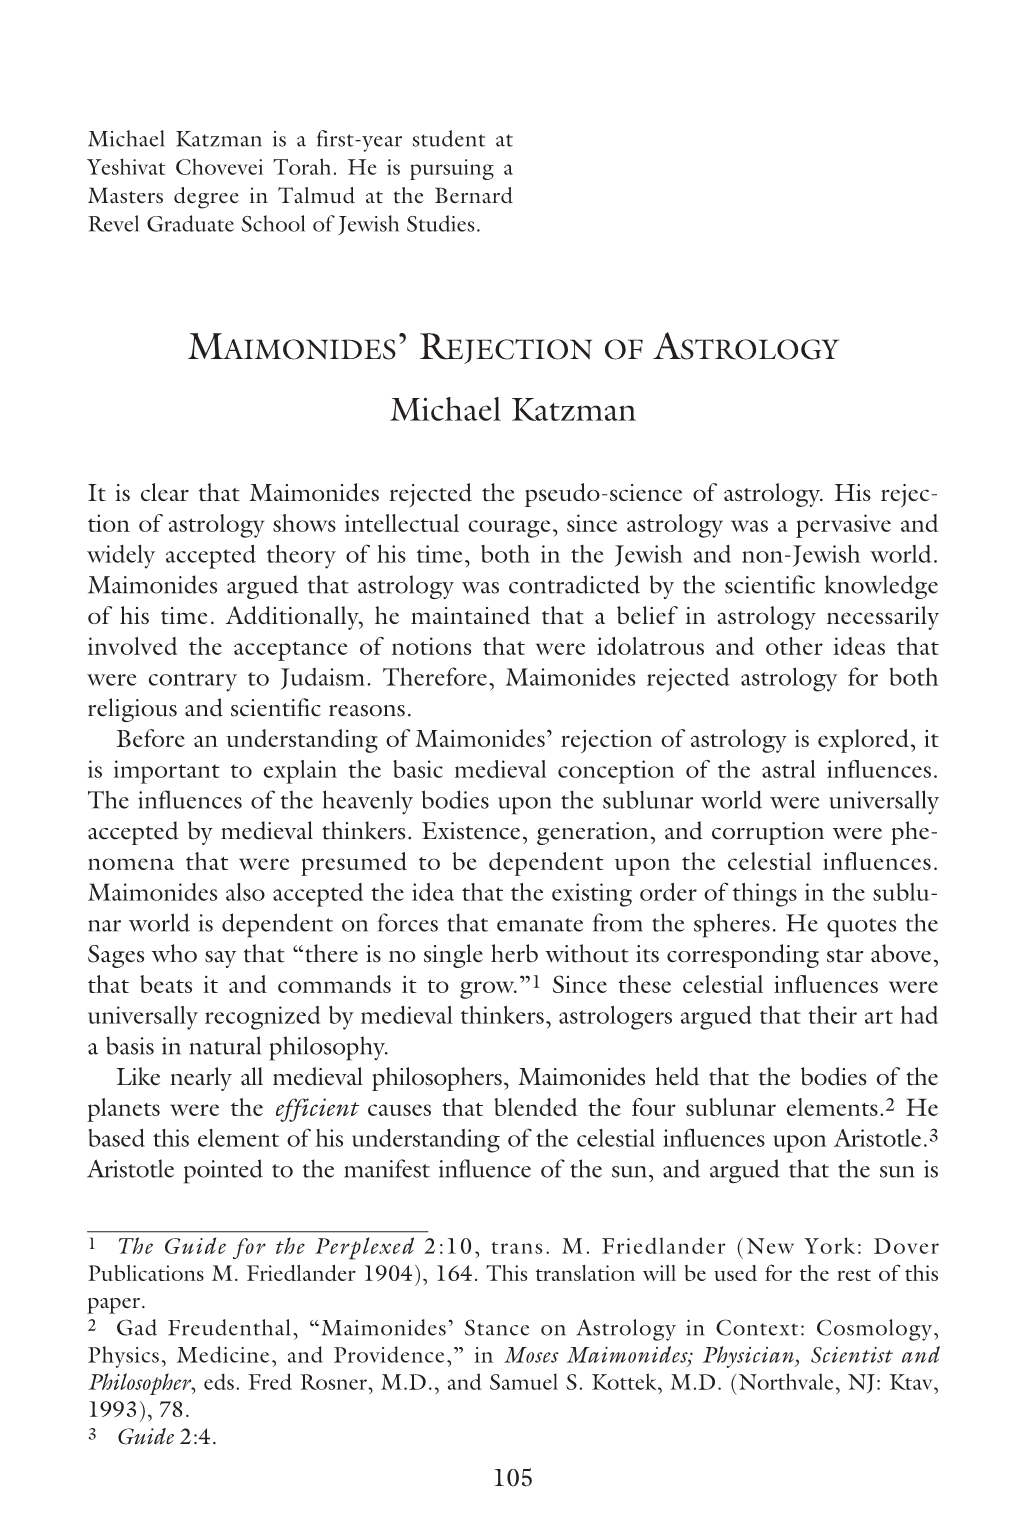 Maimonides' Rejection of Astrology